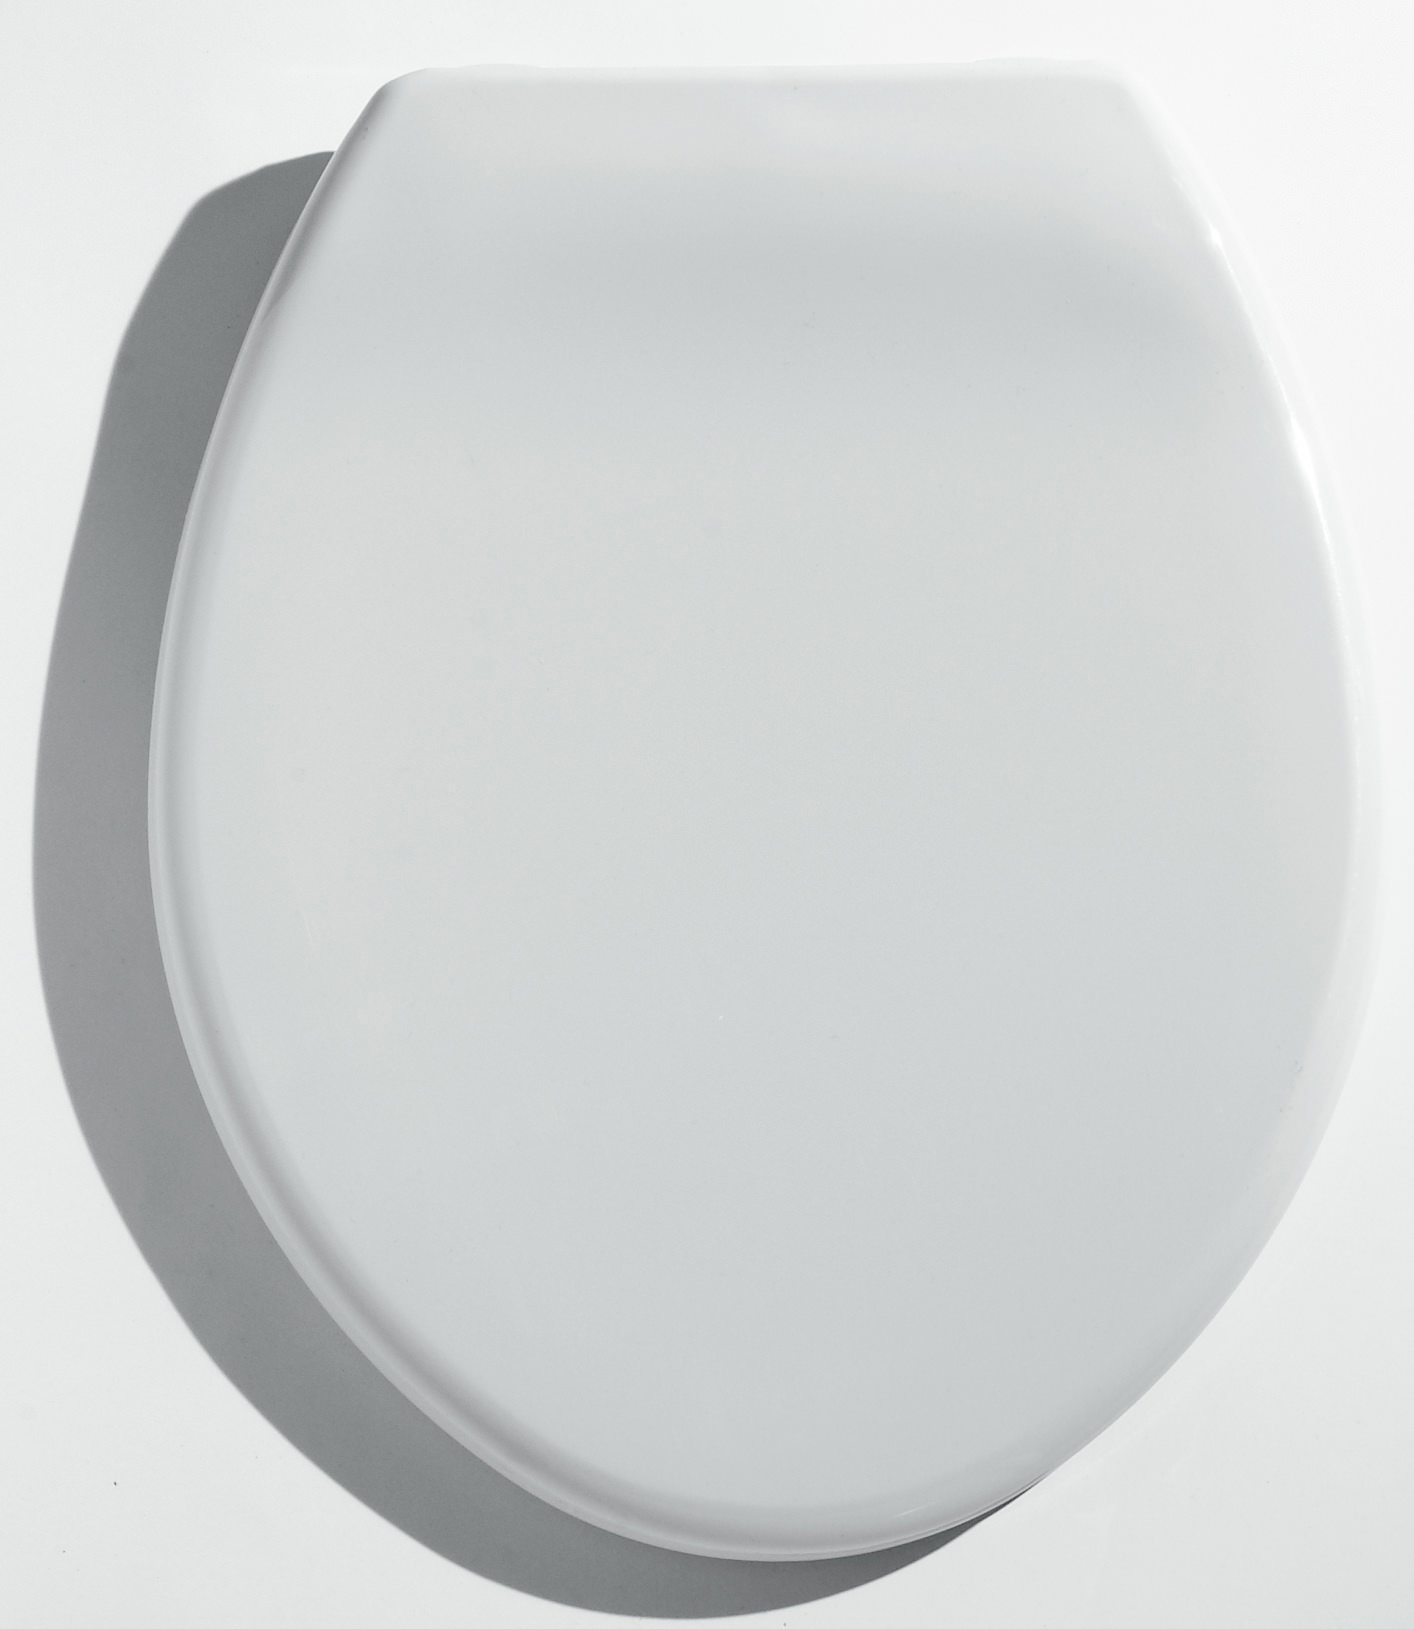 Twyford Option Oval White Toilet Seat Stainless Steel Bottom Fix Hinges WC 